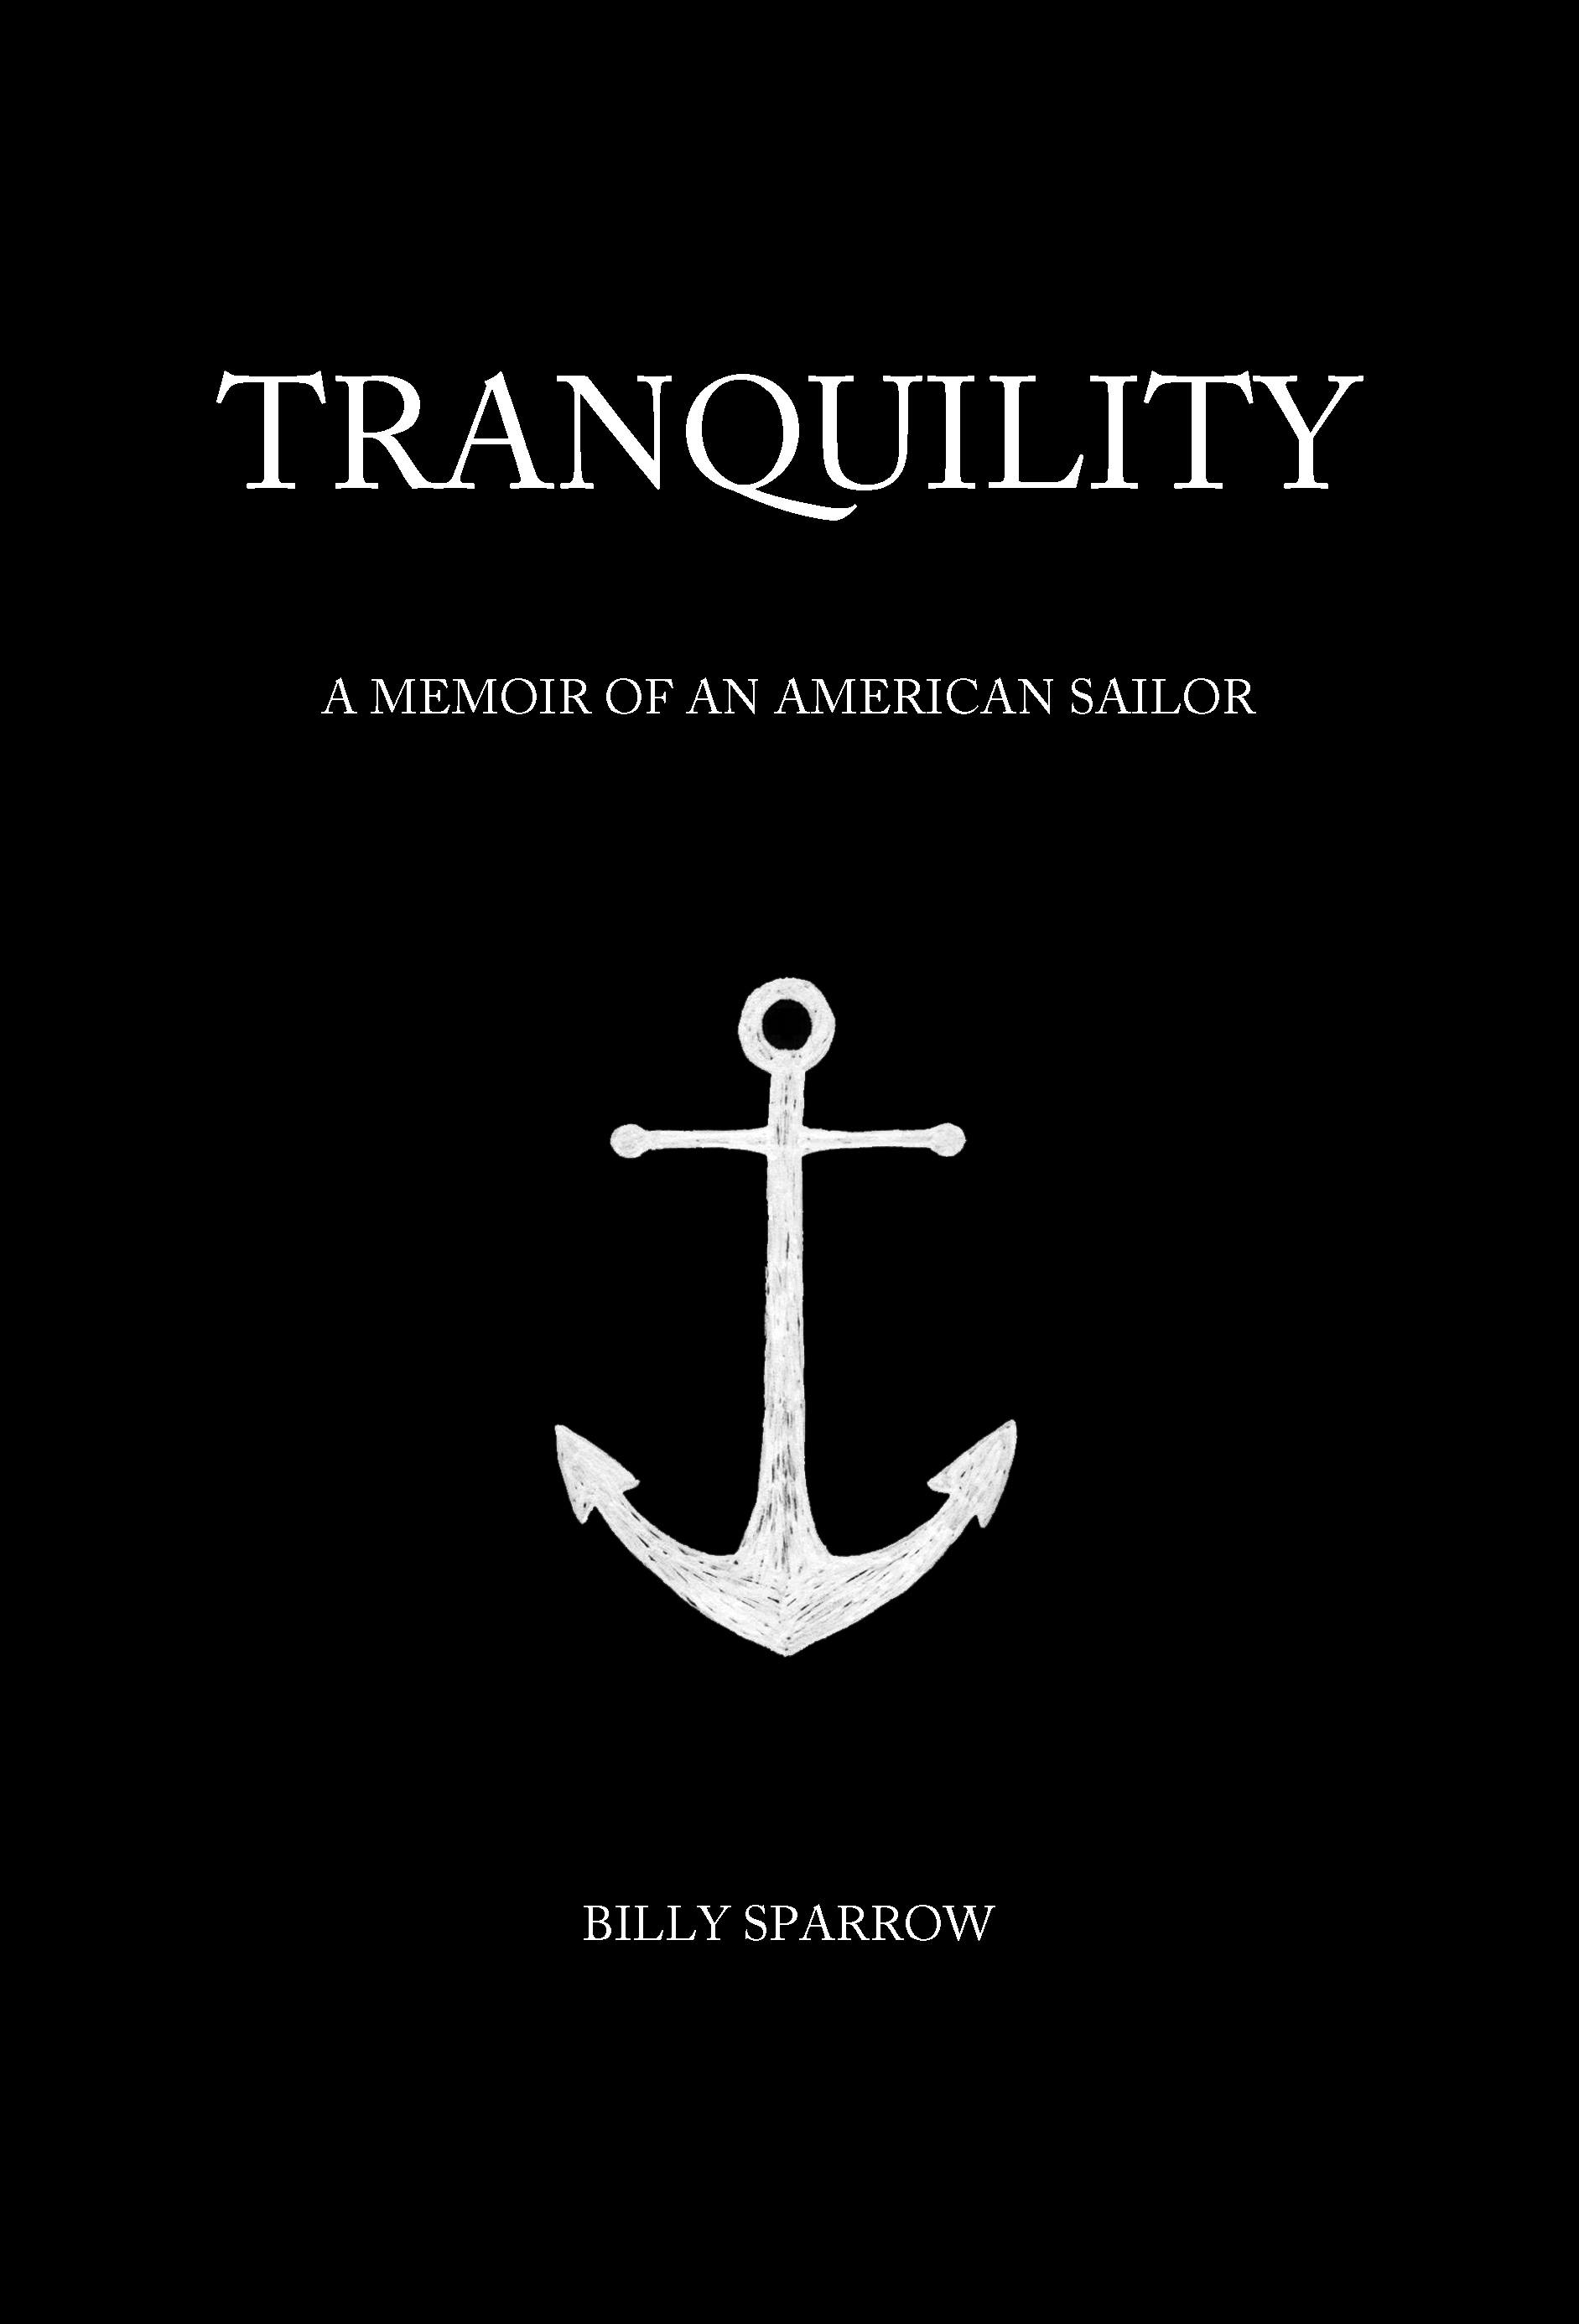 Orcas press publishes popular memoir on sailing | ‘Tranquility’ nominated for PNBA award